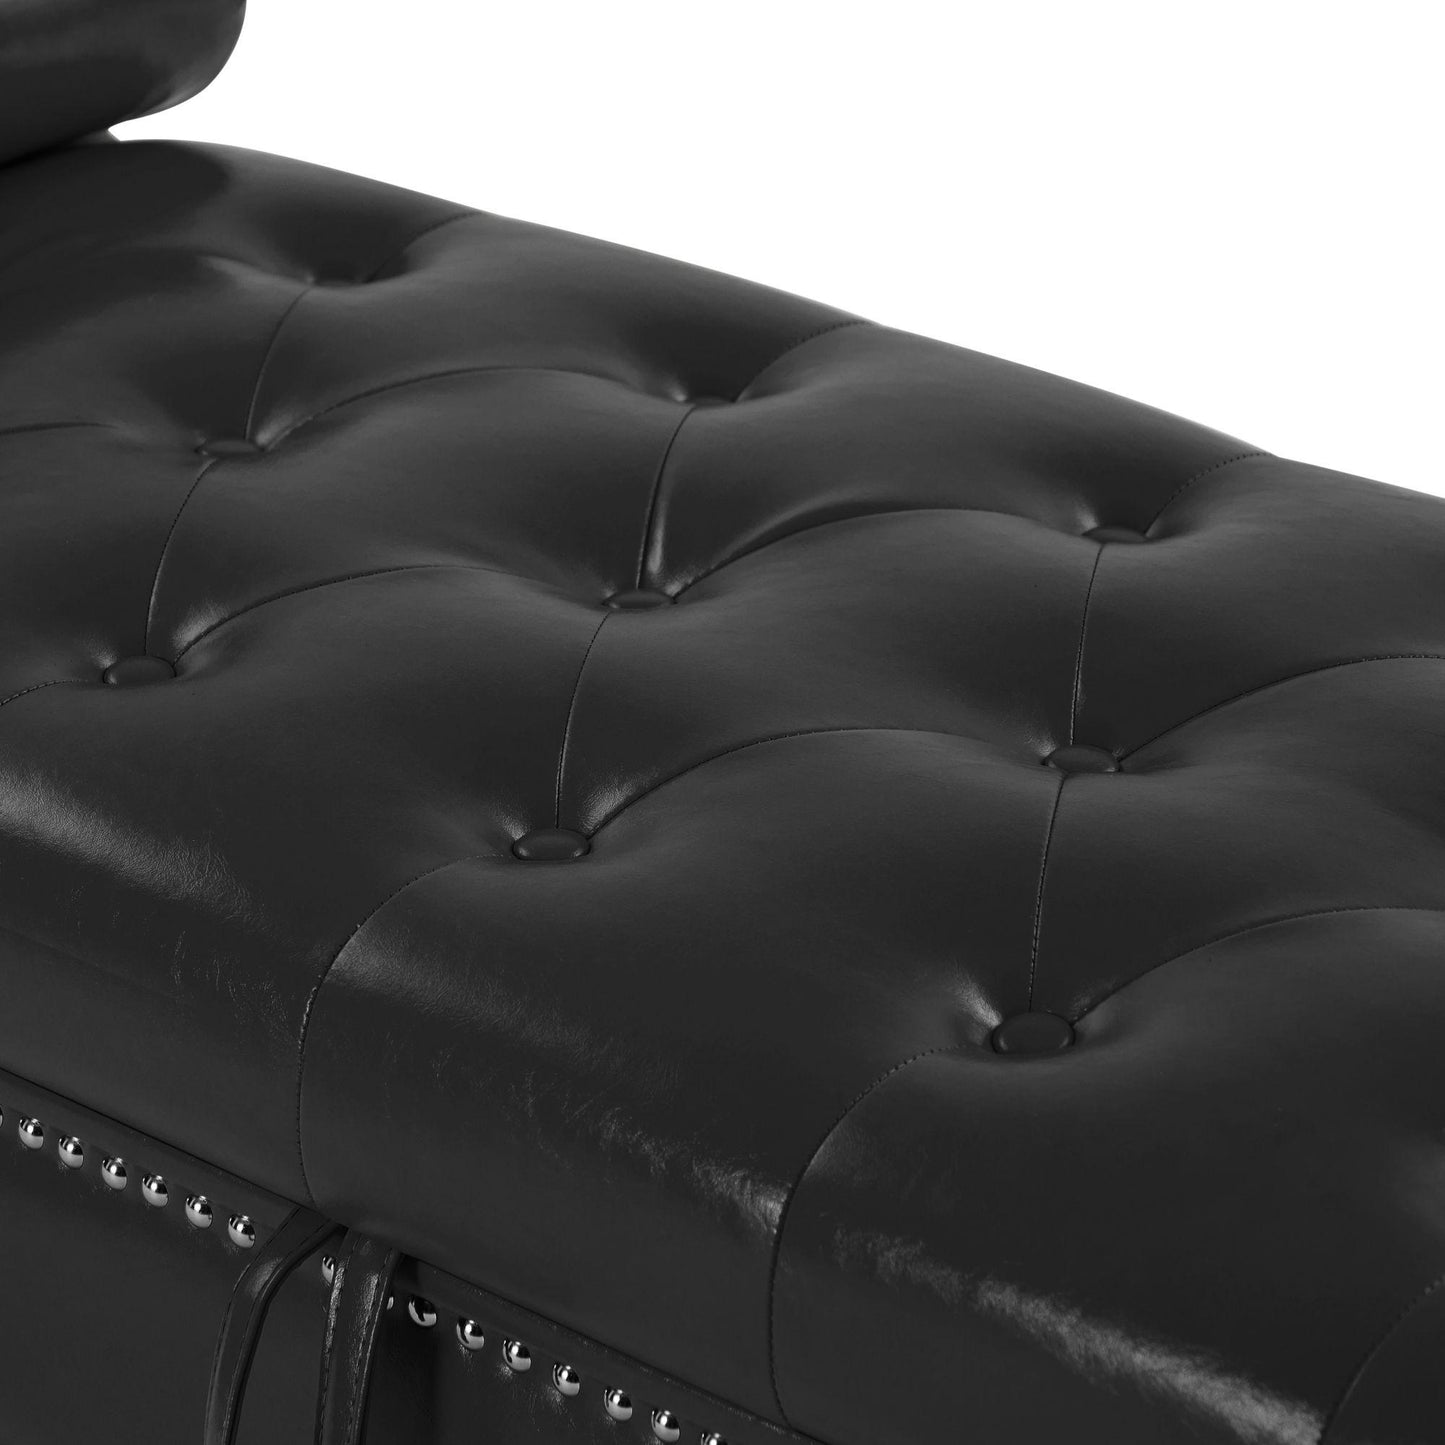 PU Leather Storage Bench with 2 Pillows and Hardware Feet